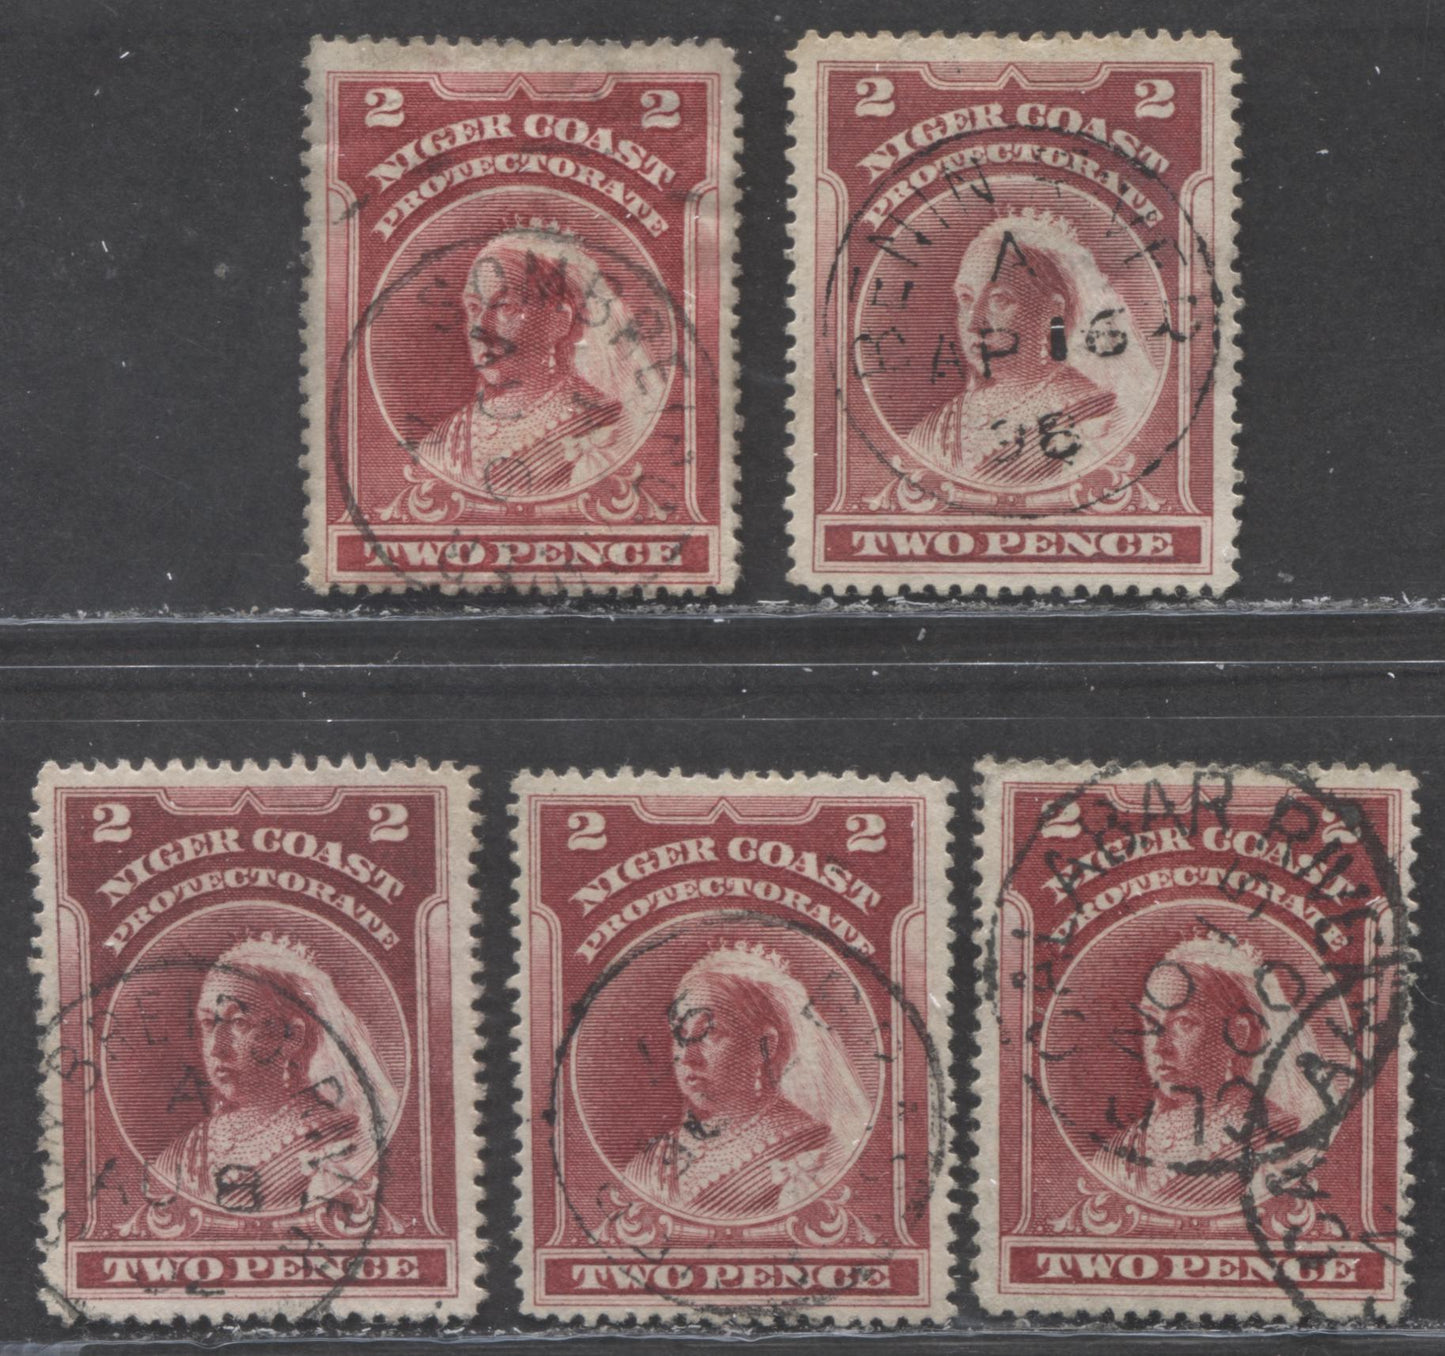 Lot 243 Niger Coast SC#57(SG#68) Two Pence Lake, Carmine Lake, Deep Lake 1897 - 1898 Watermarked Issue, Perf 14.5 - 15, A Fine - Very Fine Used Example, Click on Listing to See ALL Pictures, 2022 Scott Classic Cat. $12.5 USD